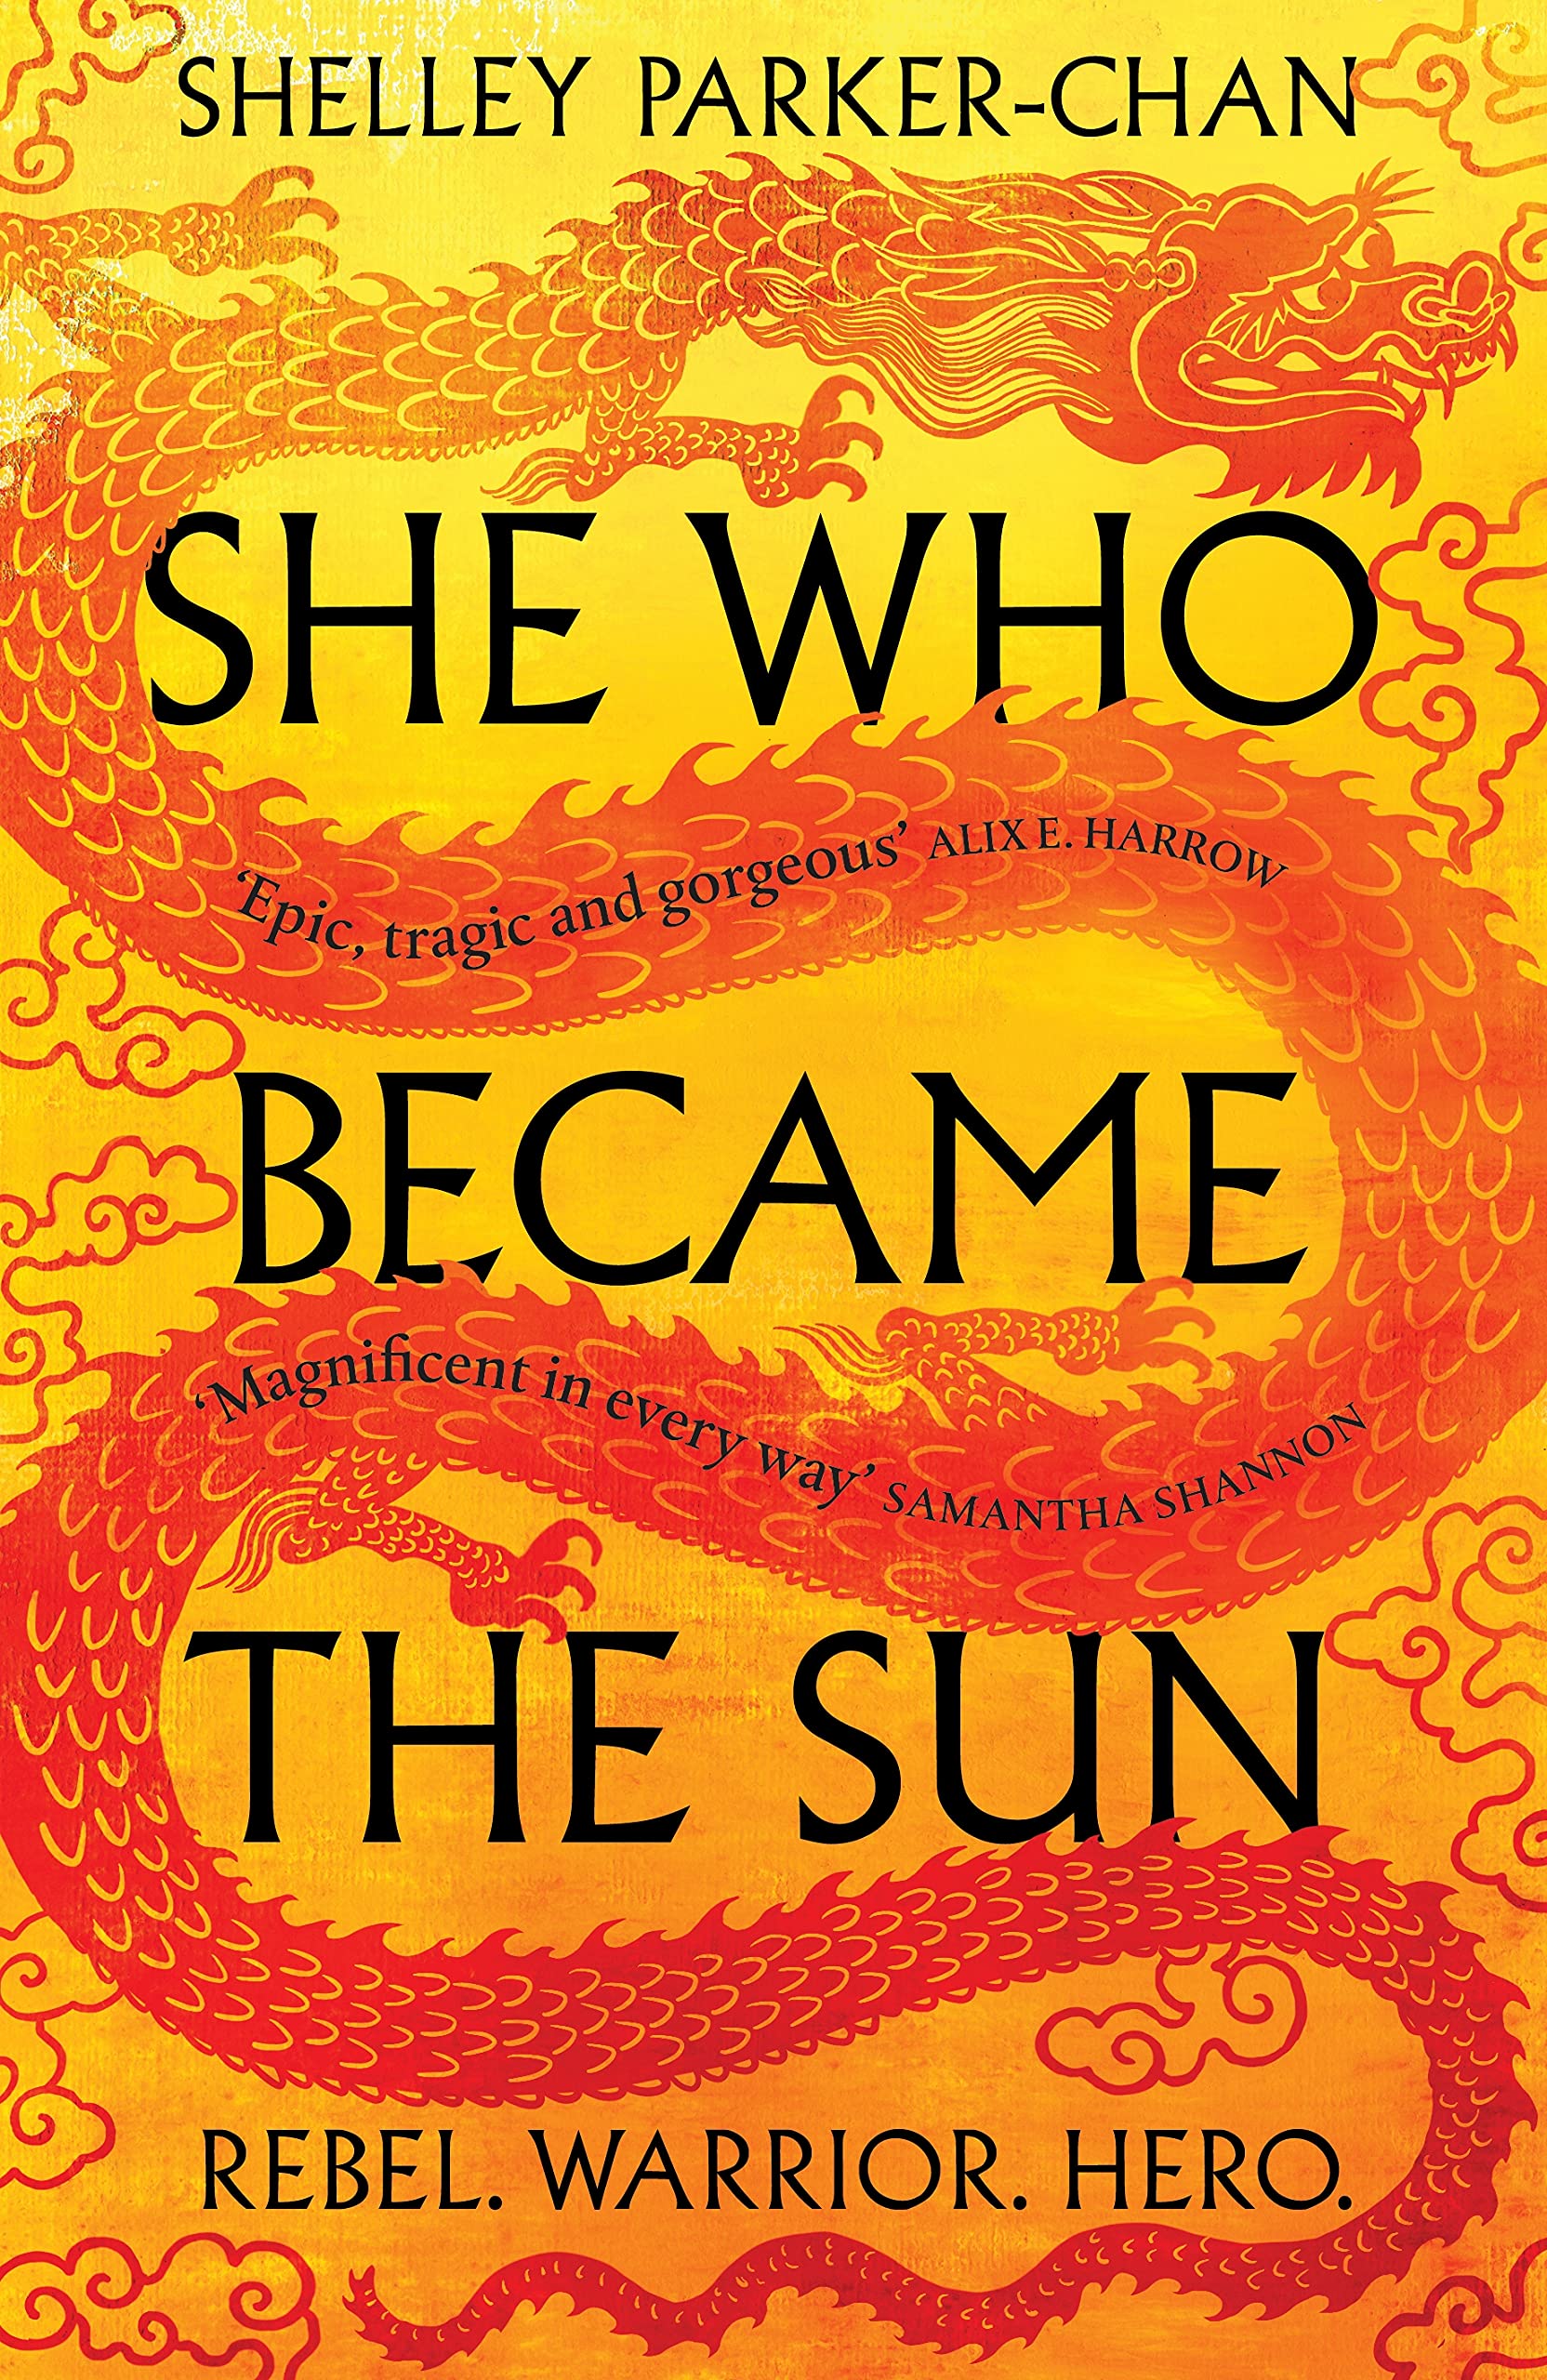 The UK cover of She Who Became the Sun. A Yellow-orange background with a deeper orange gradient. A print of a scarlet imperial dragon curves around the title, with swirling smoke all over the cover.